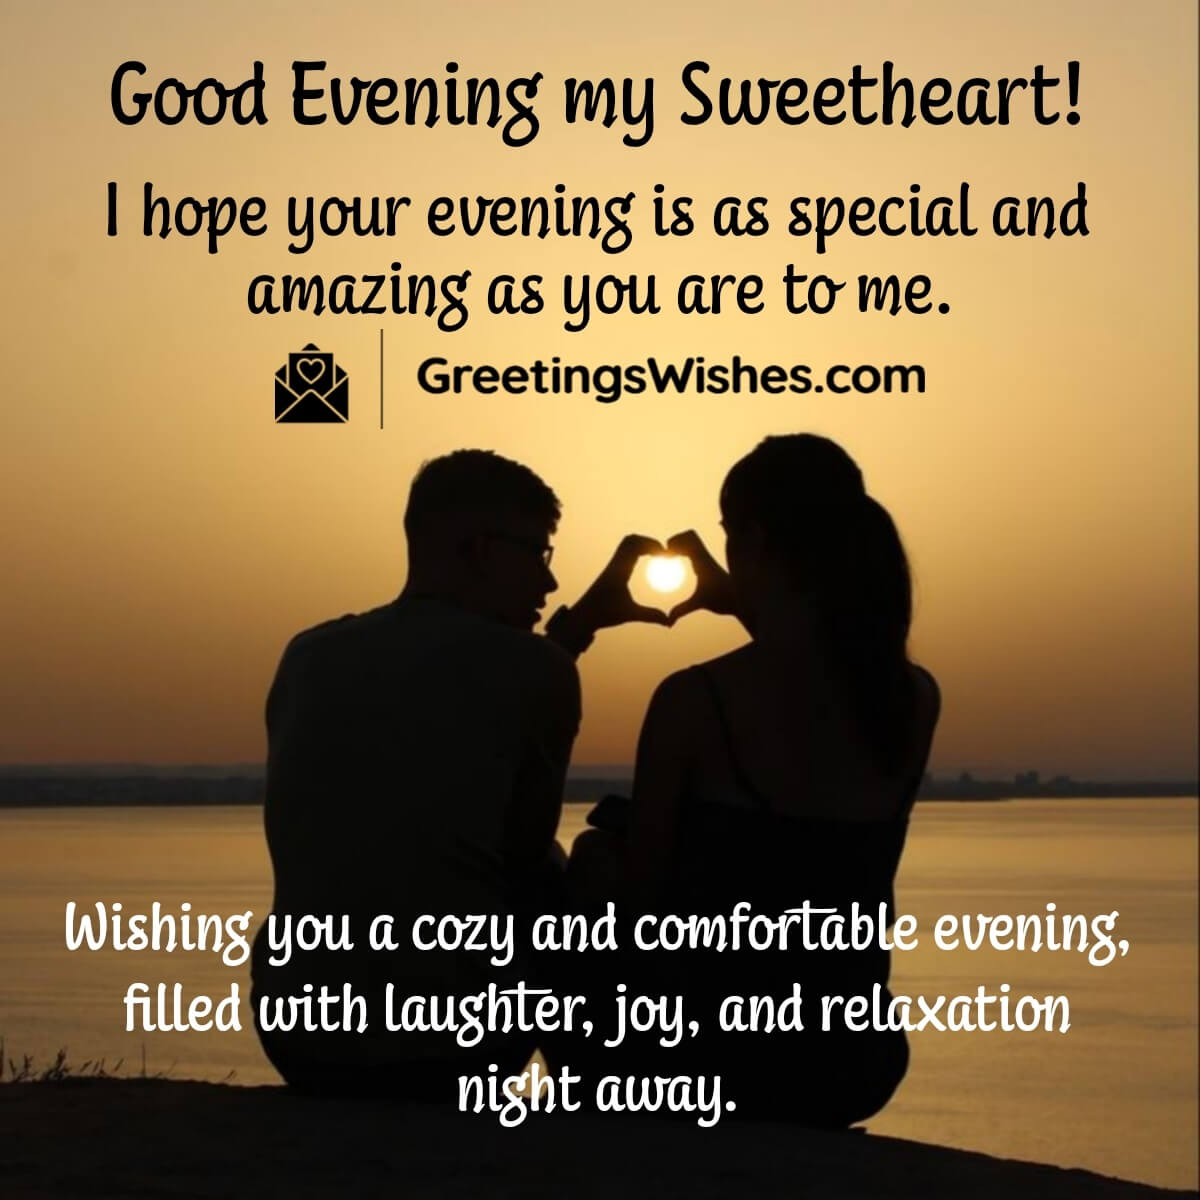 Good Evening Message To Sweetheart